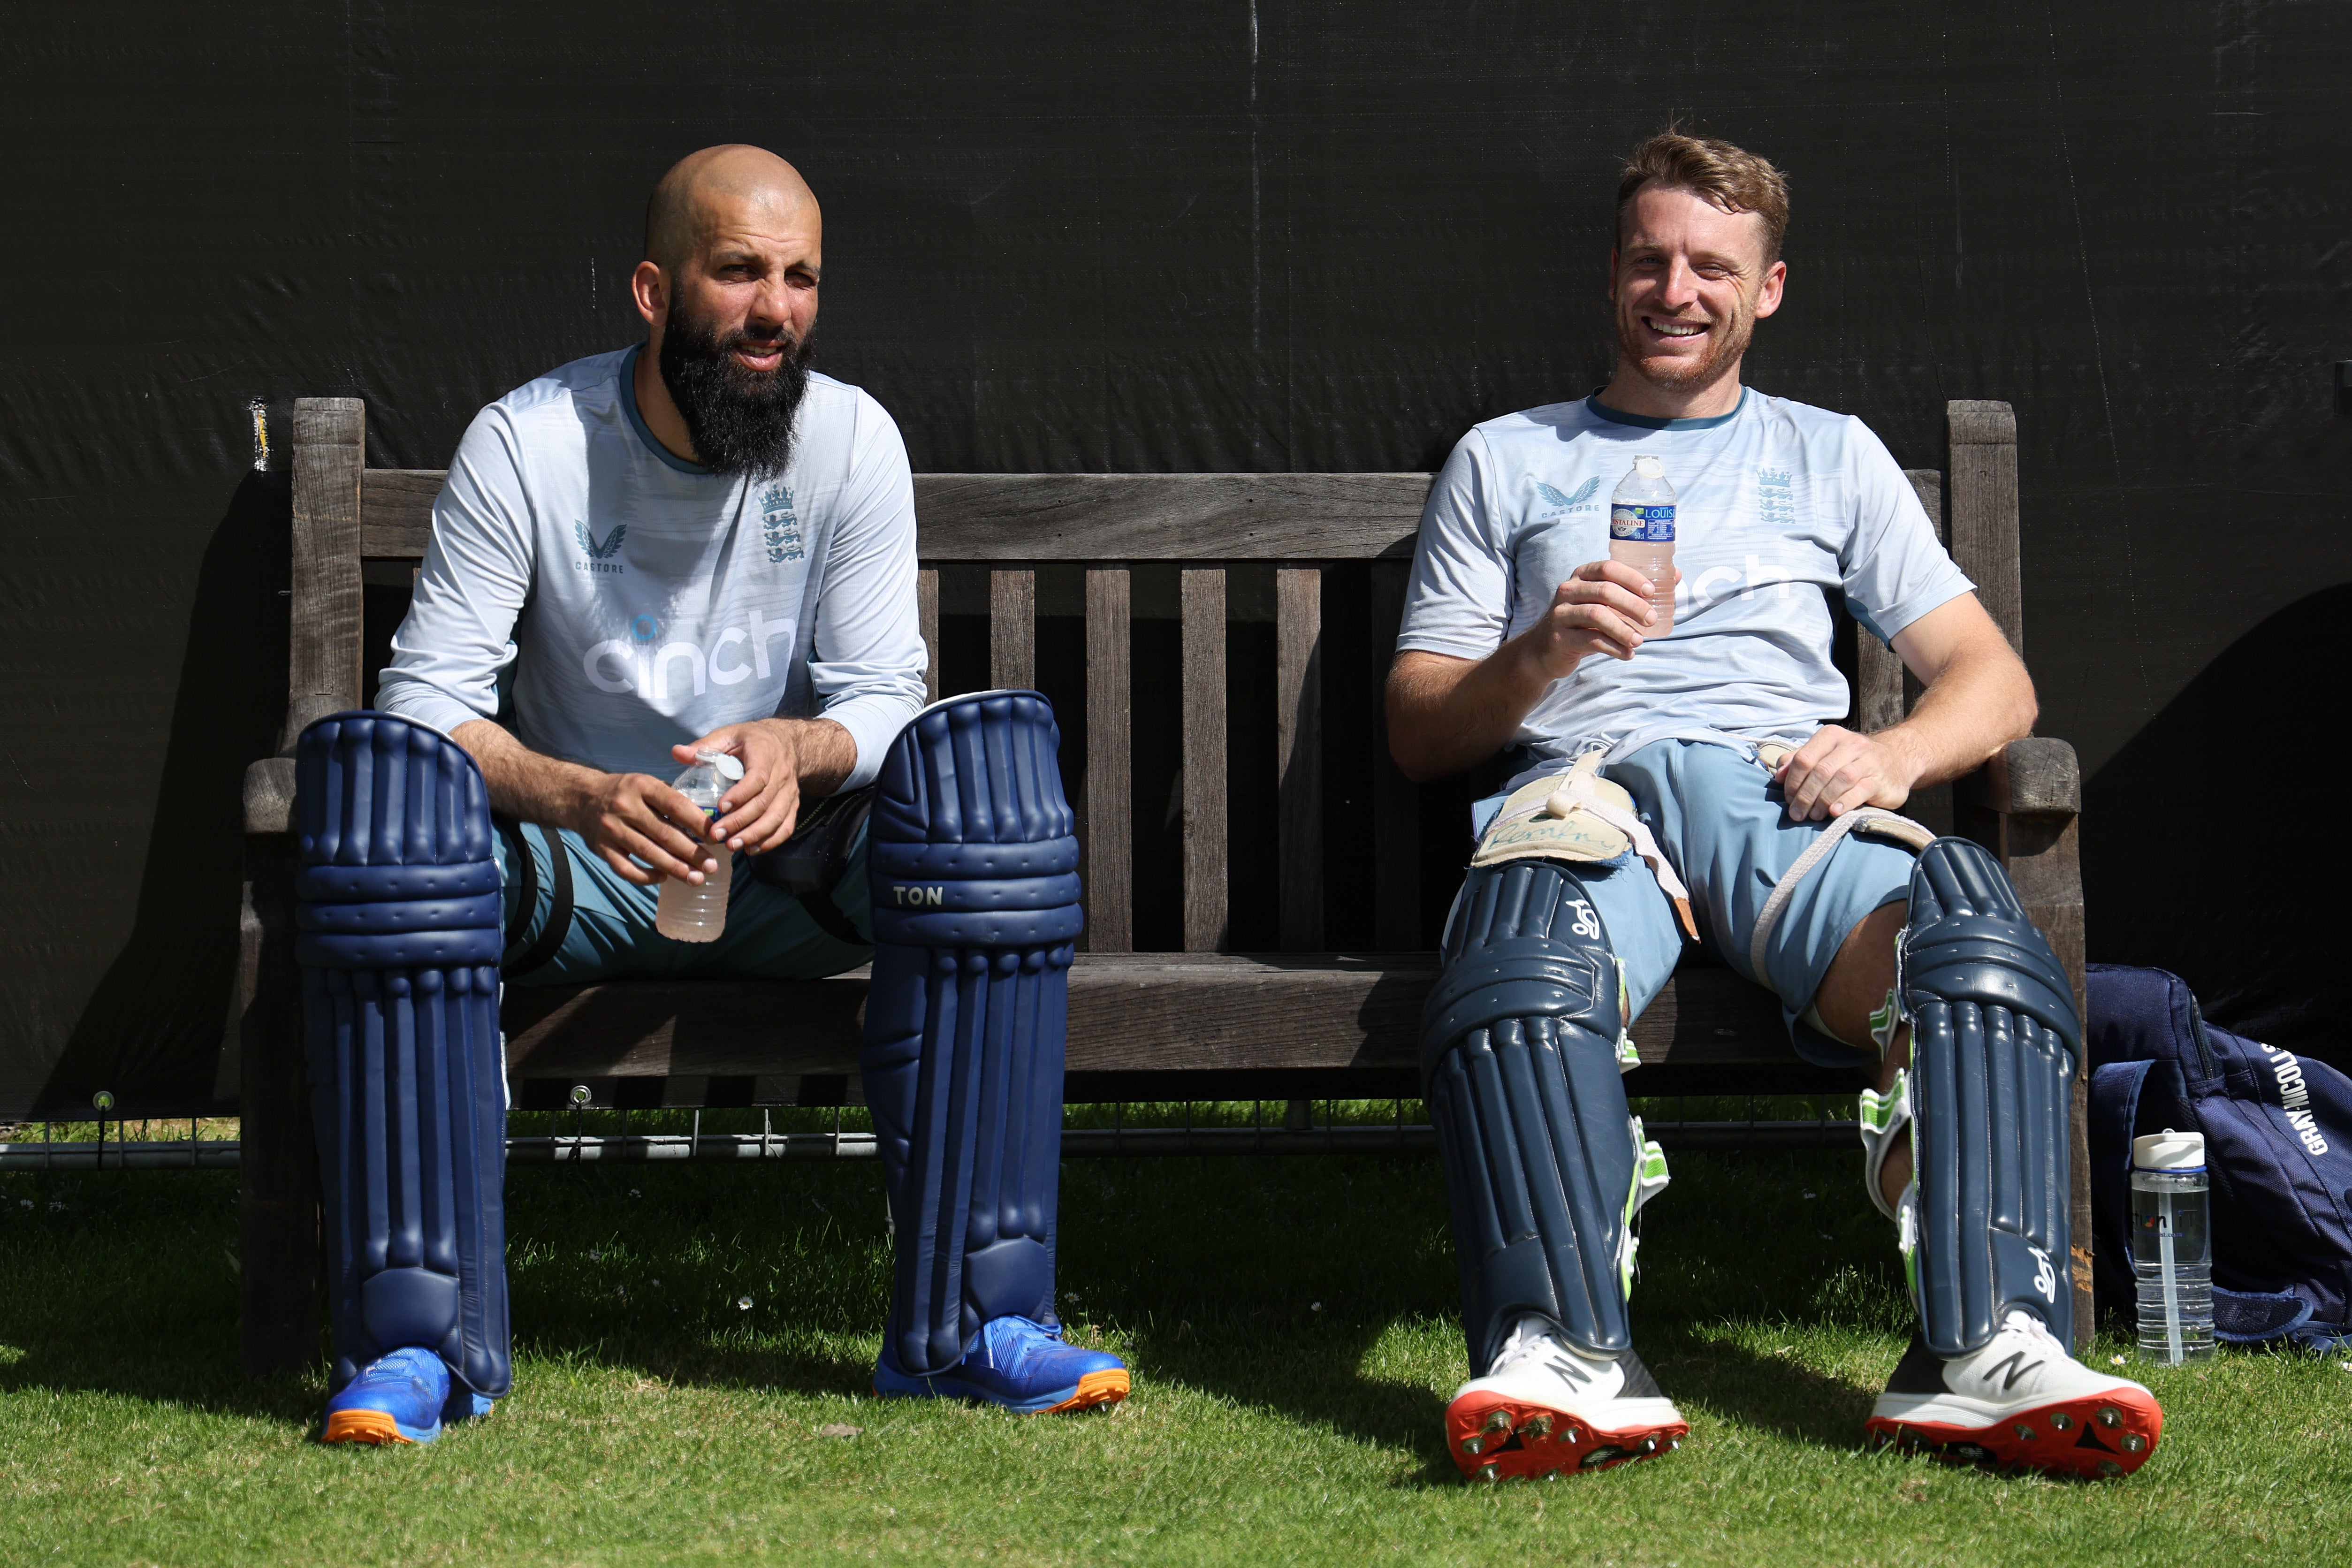 Moeen Ali (left) and Jos Buttler (right) have played together for England for many years